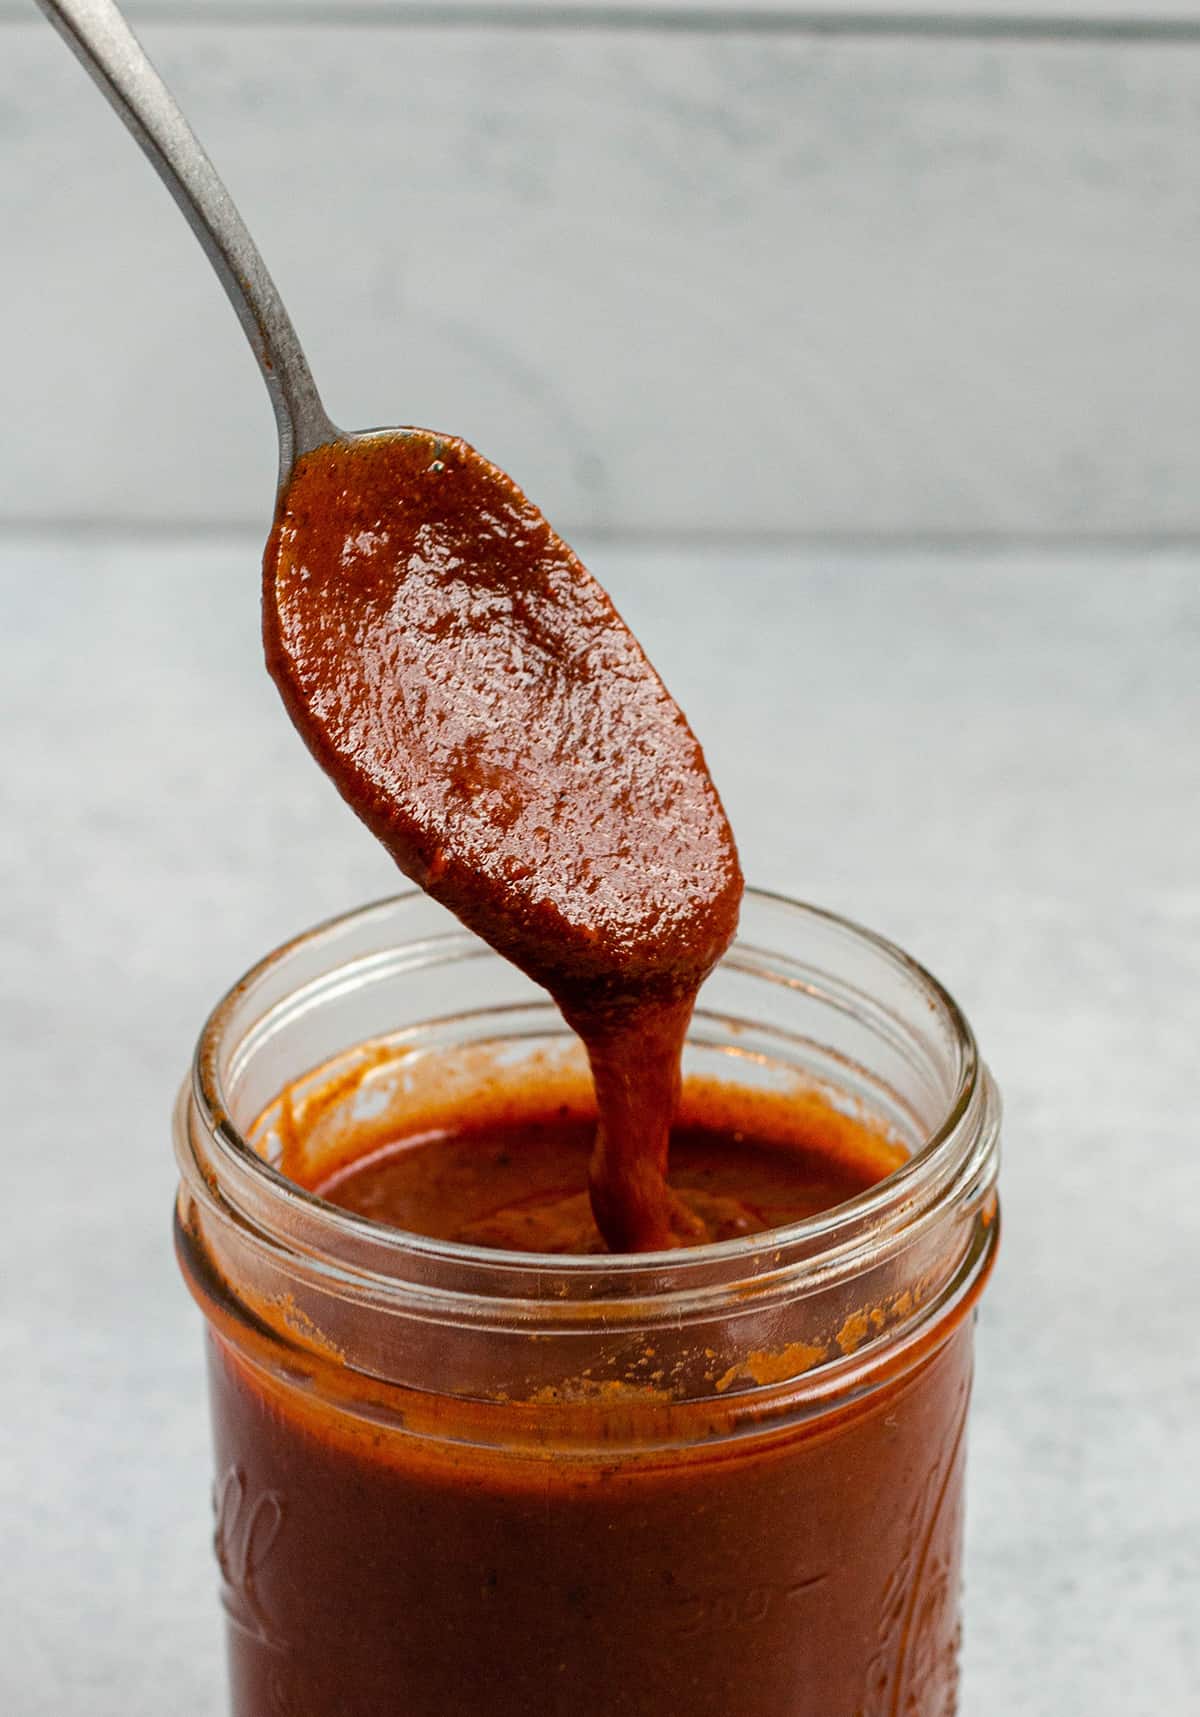 Spoon scooping out homemade enchilada sauce from a jar.